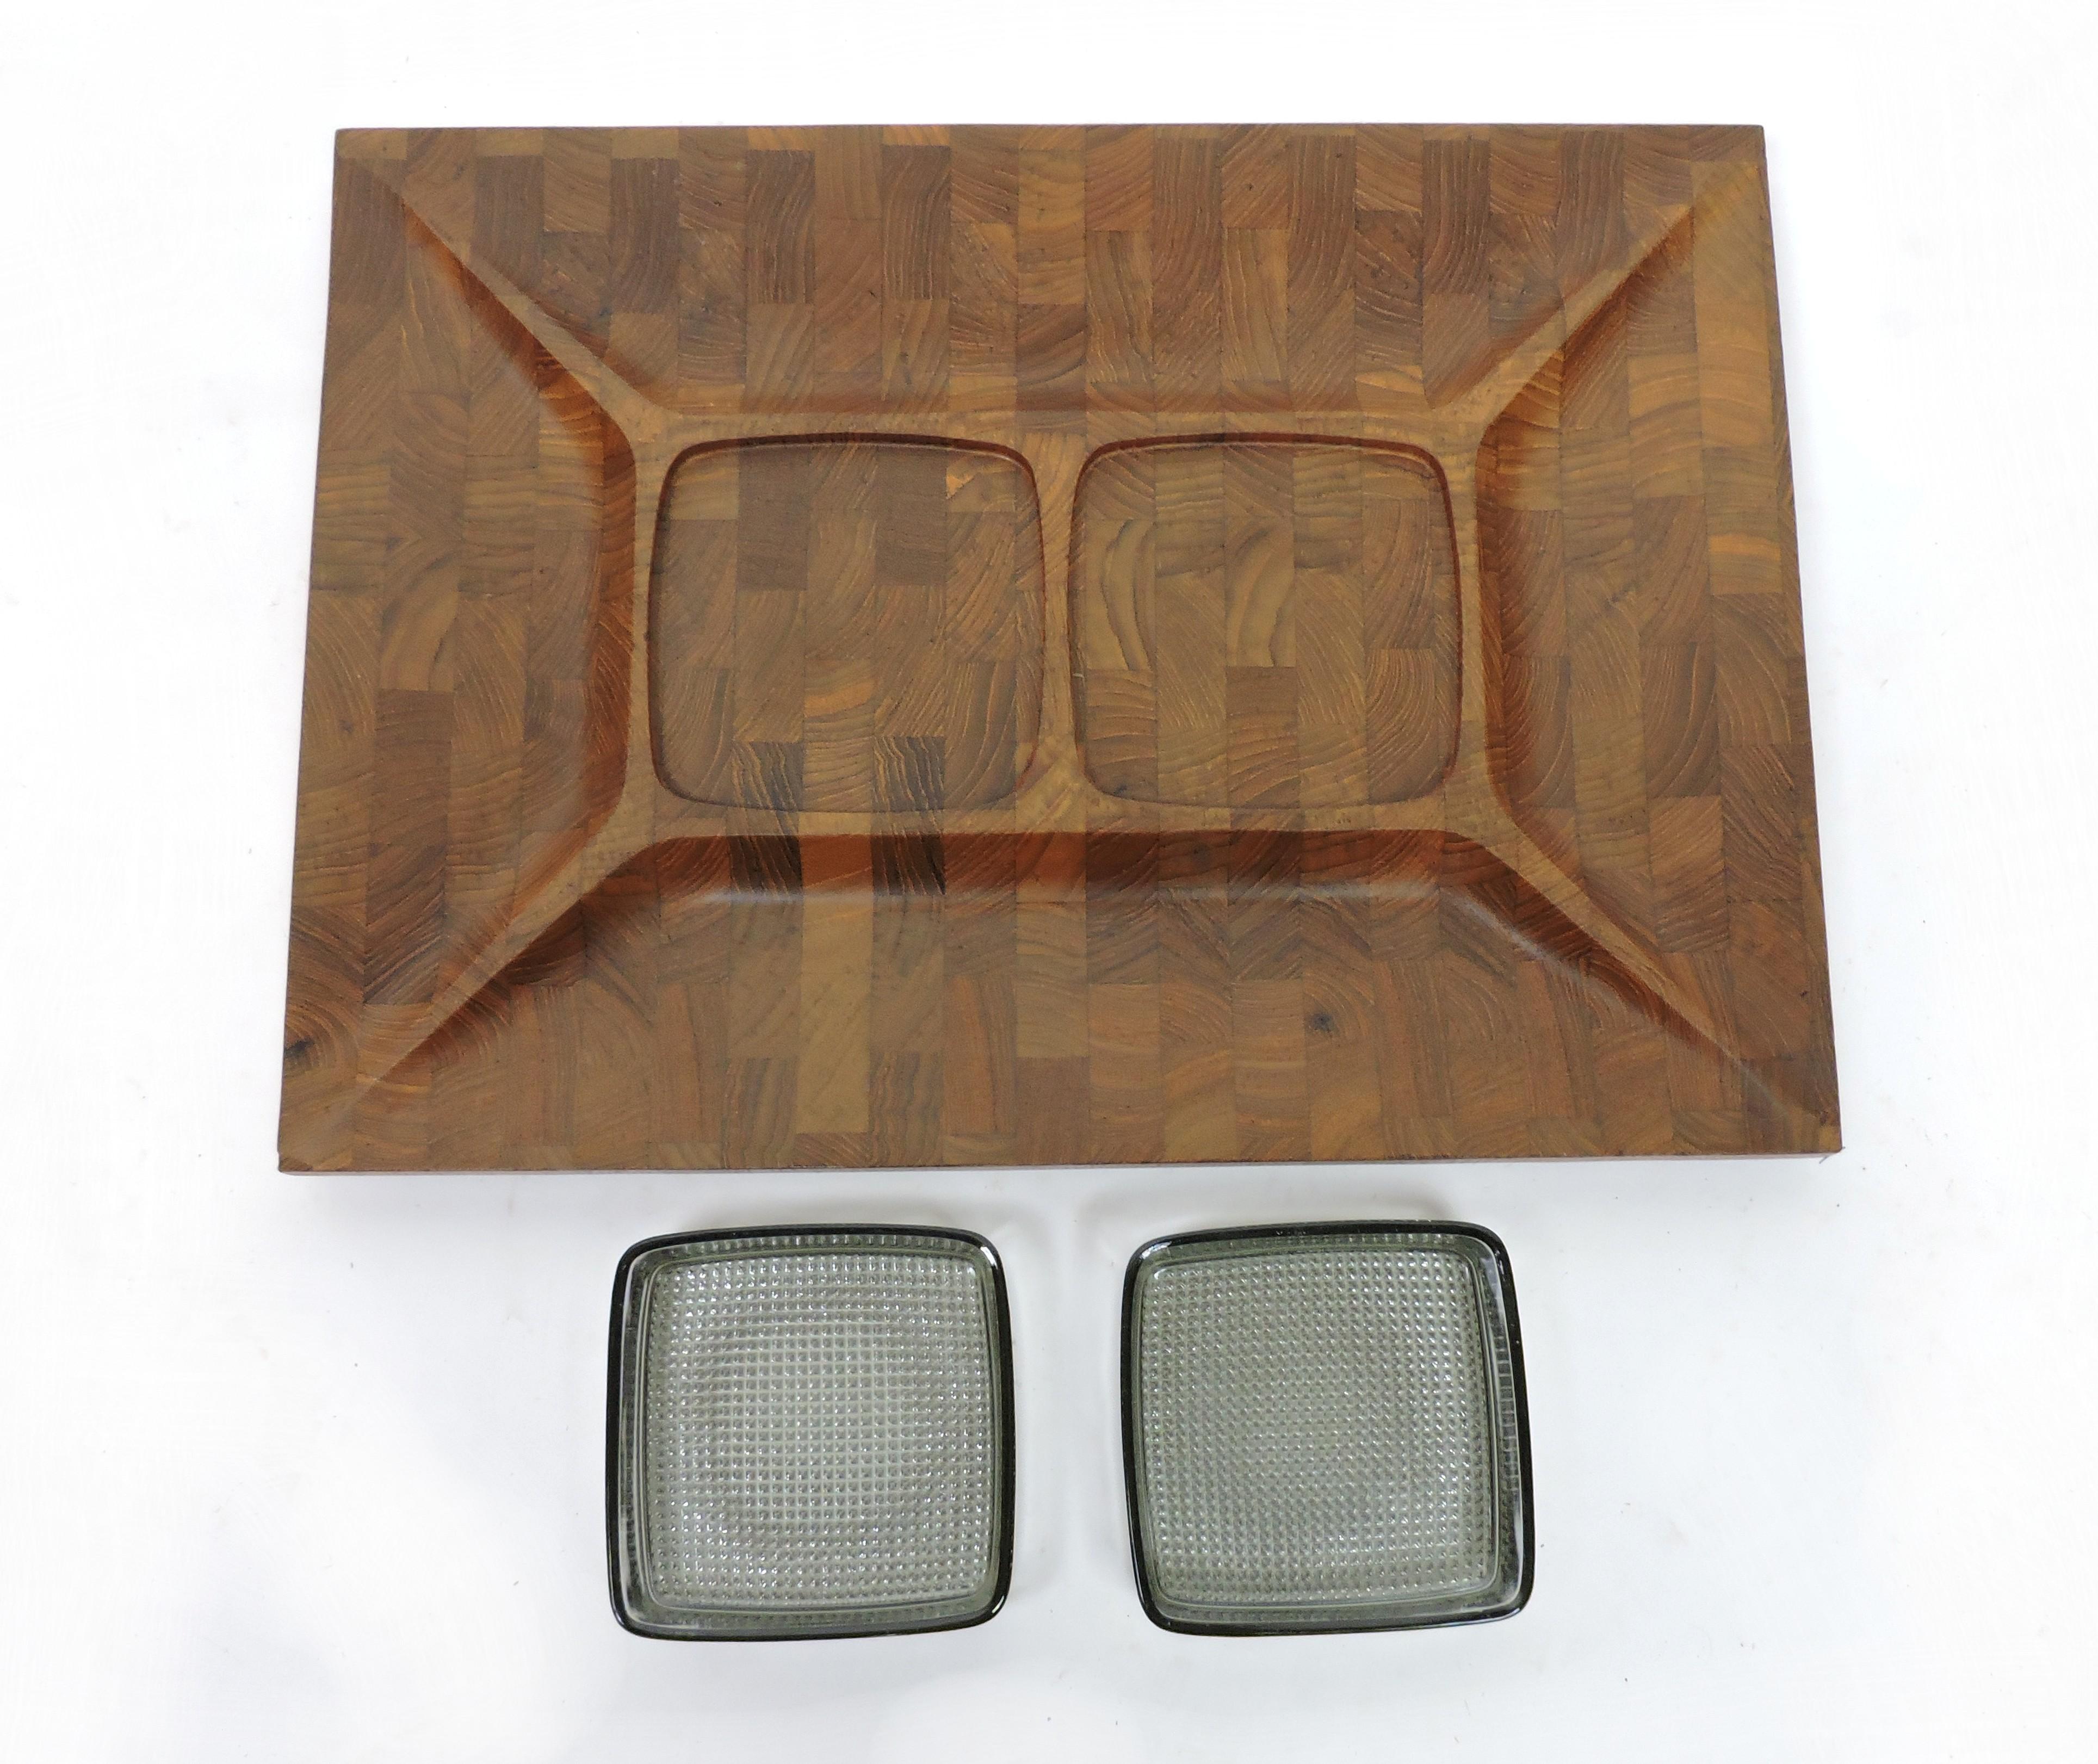 Digsmed Large Danish Modern Divided Teak Tray with 2 Glass Inserts In Good Condition For Sale In Chesterfield, NJ